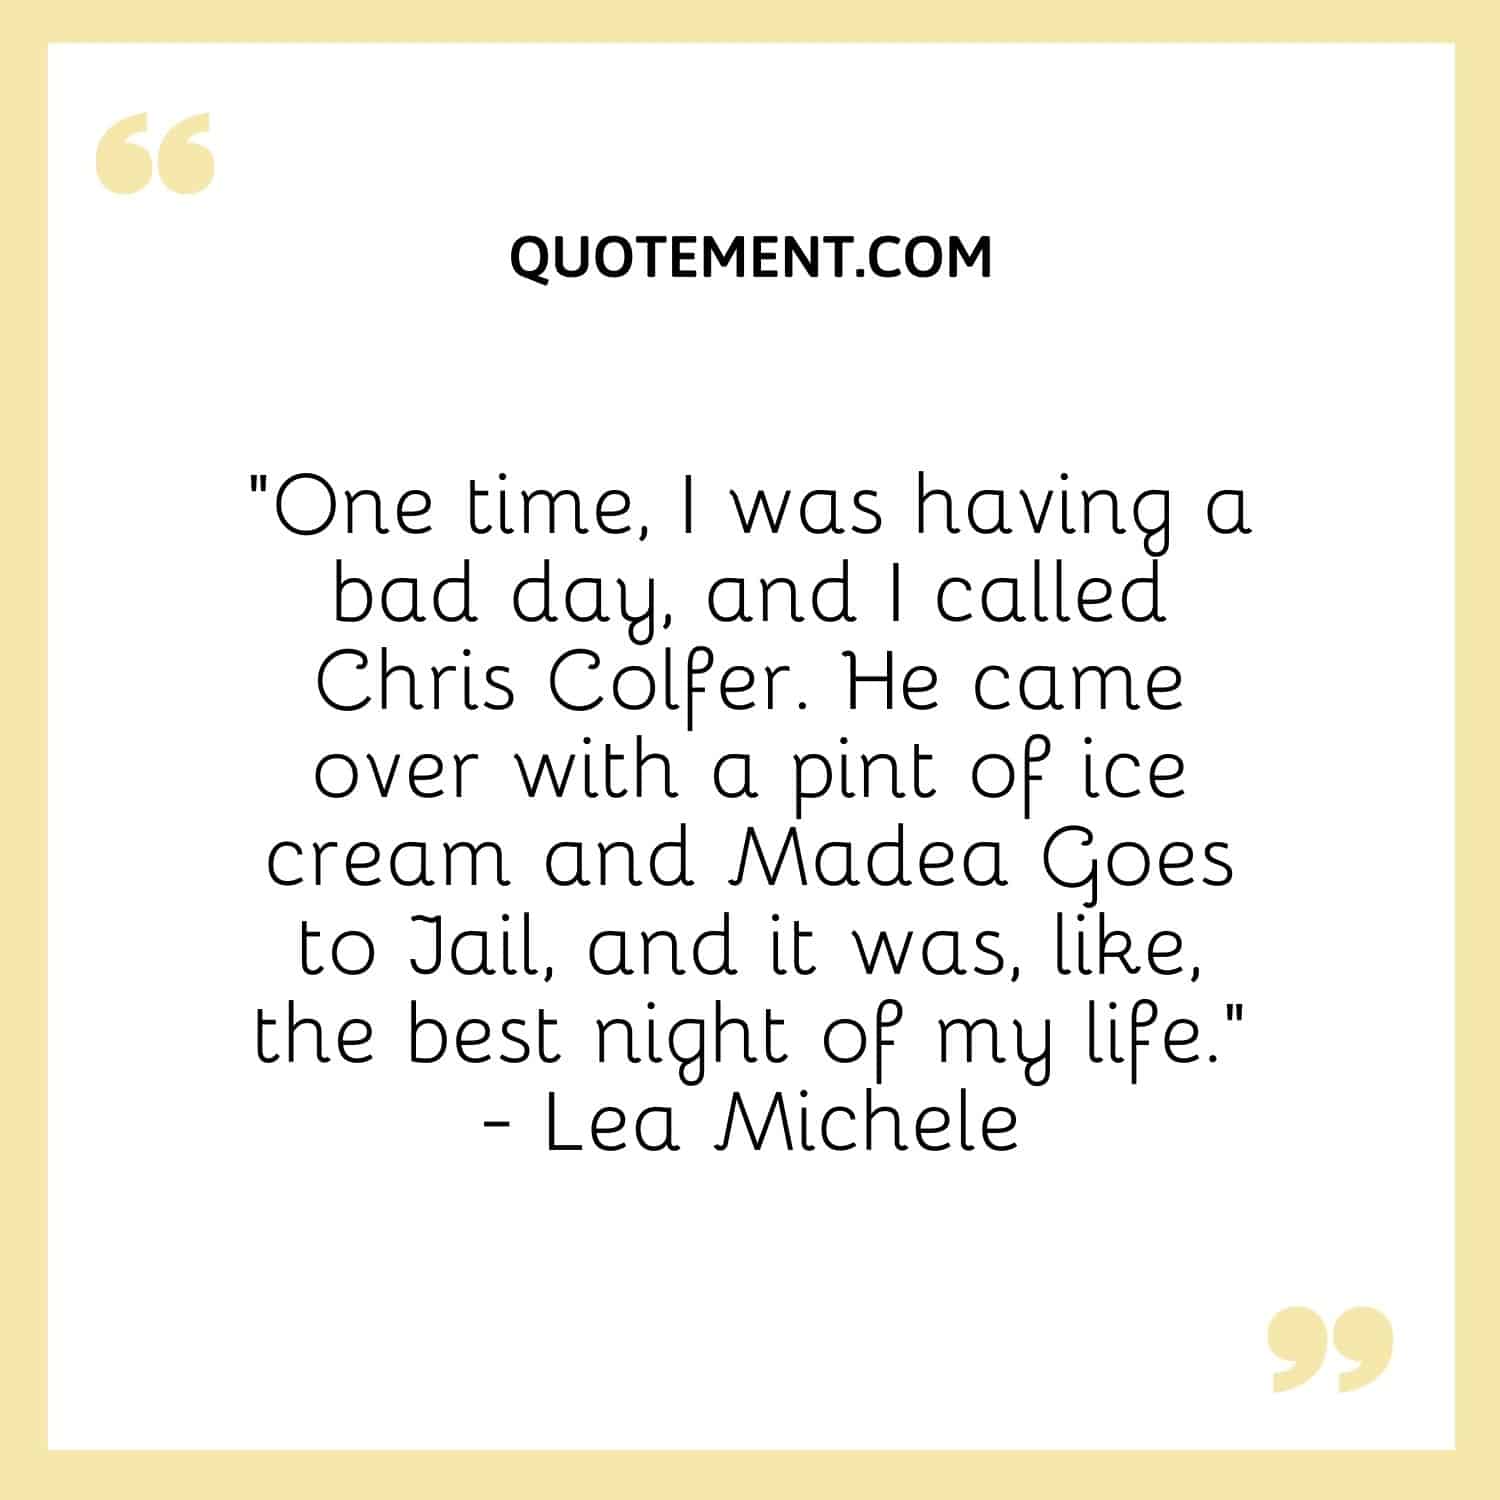 One time, I was having a bad day, and I called Chris Colfer. He came over with a pint of ice cream and Madea Goes to Jail, and it was, like, the best night of my life. — Lea Michele